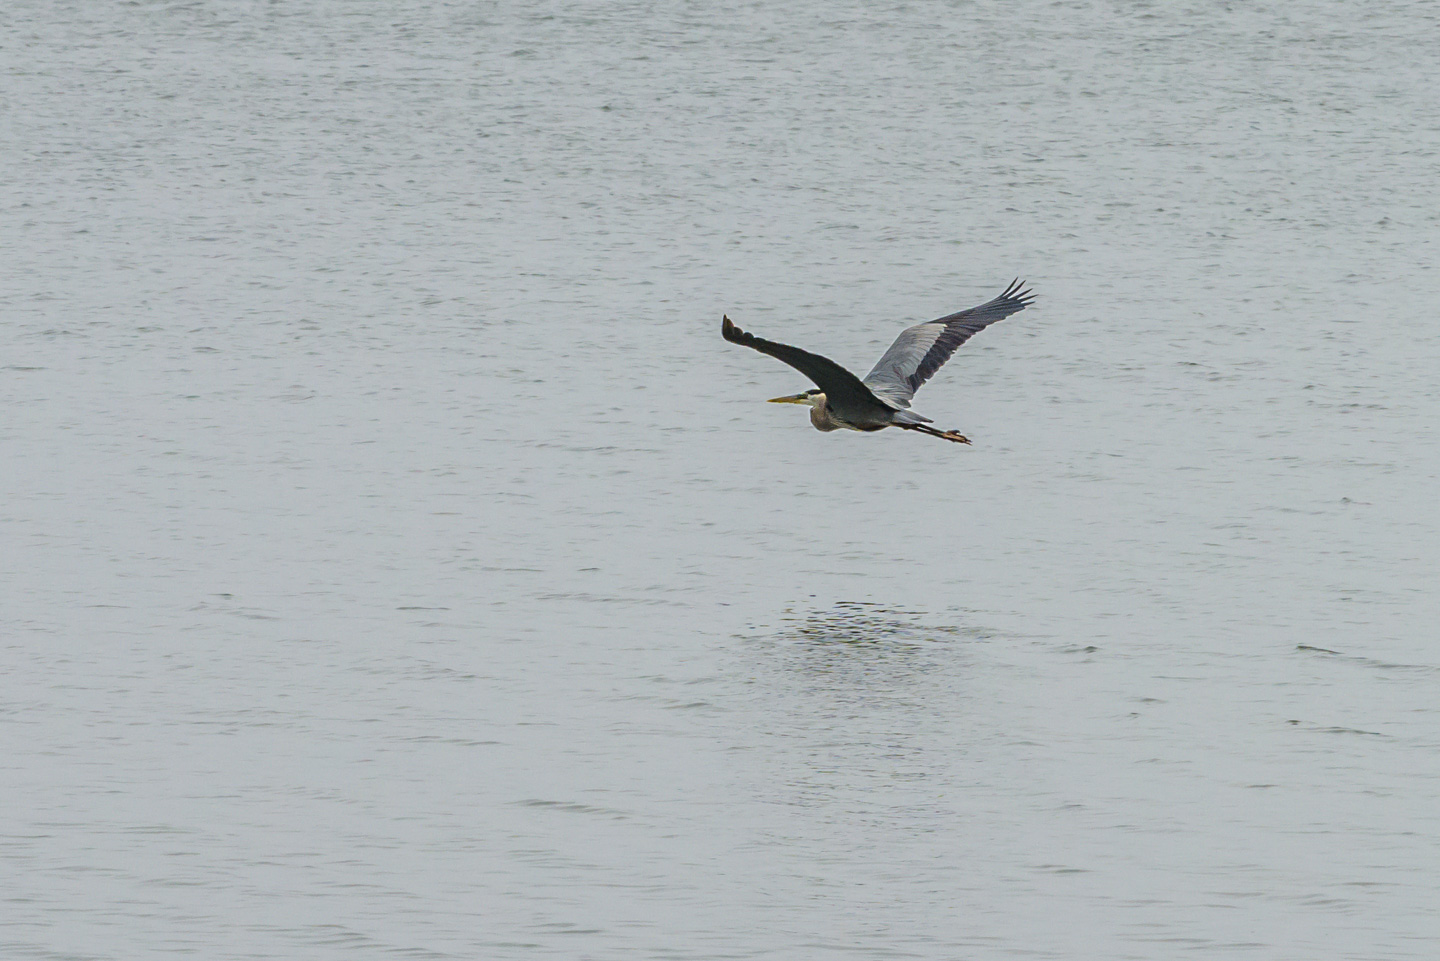 A Great Blue Heron flying over the water